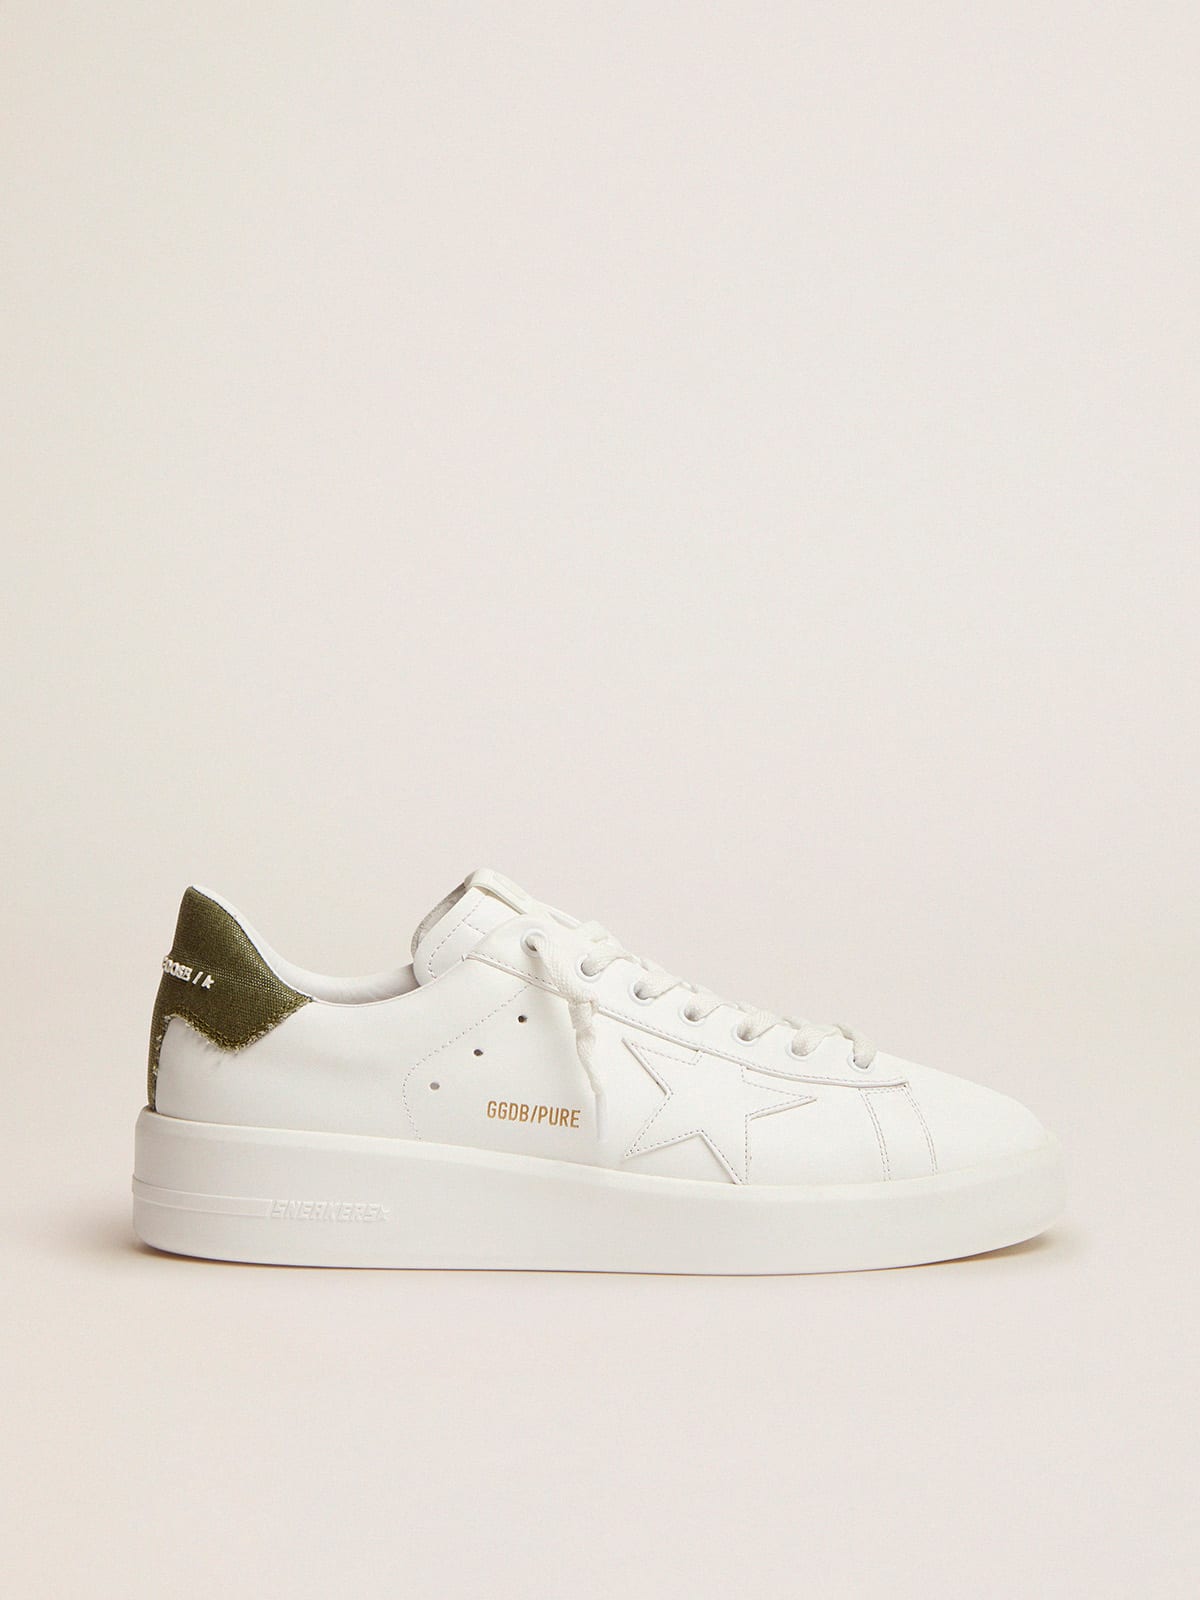 Golden Goose - Purestar sneakers in white leather with green canvas heel tab in 